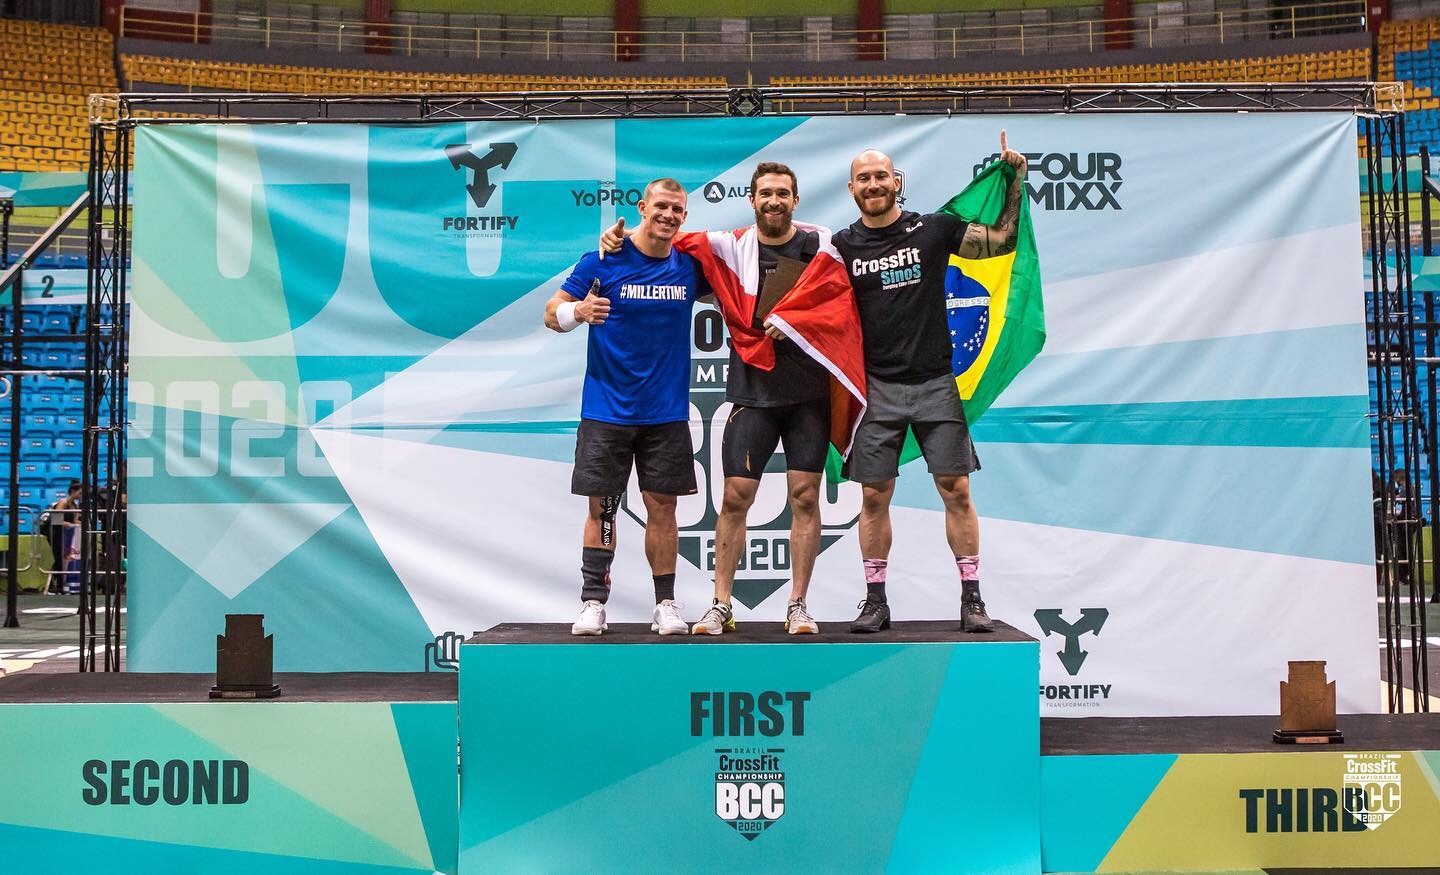 Adam Davidson wins the Brazil CrossFit Championship in Sao Paulo 2020, earning his position to compete at the 2020 CrossFit Games